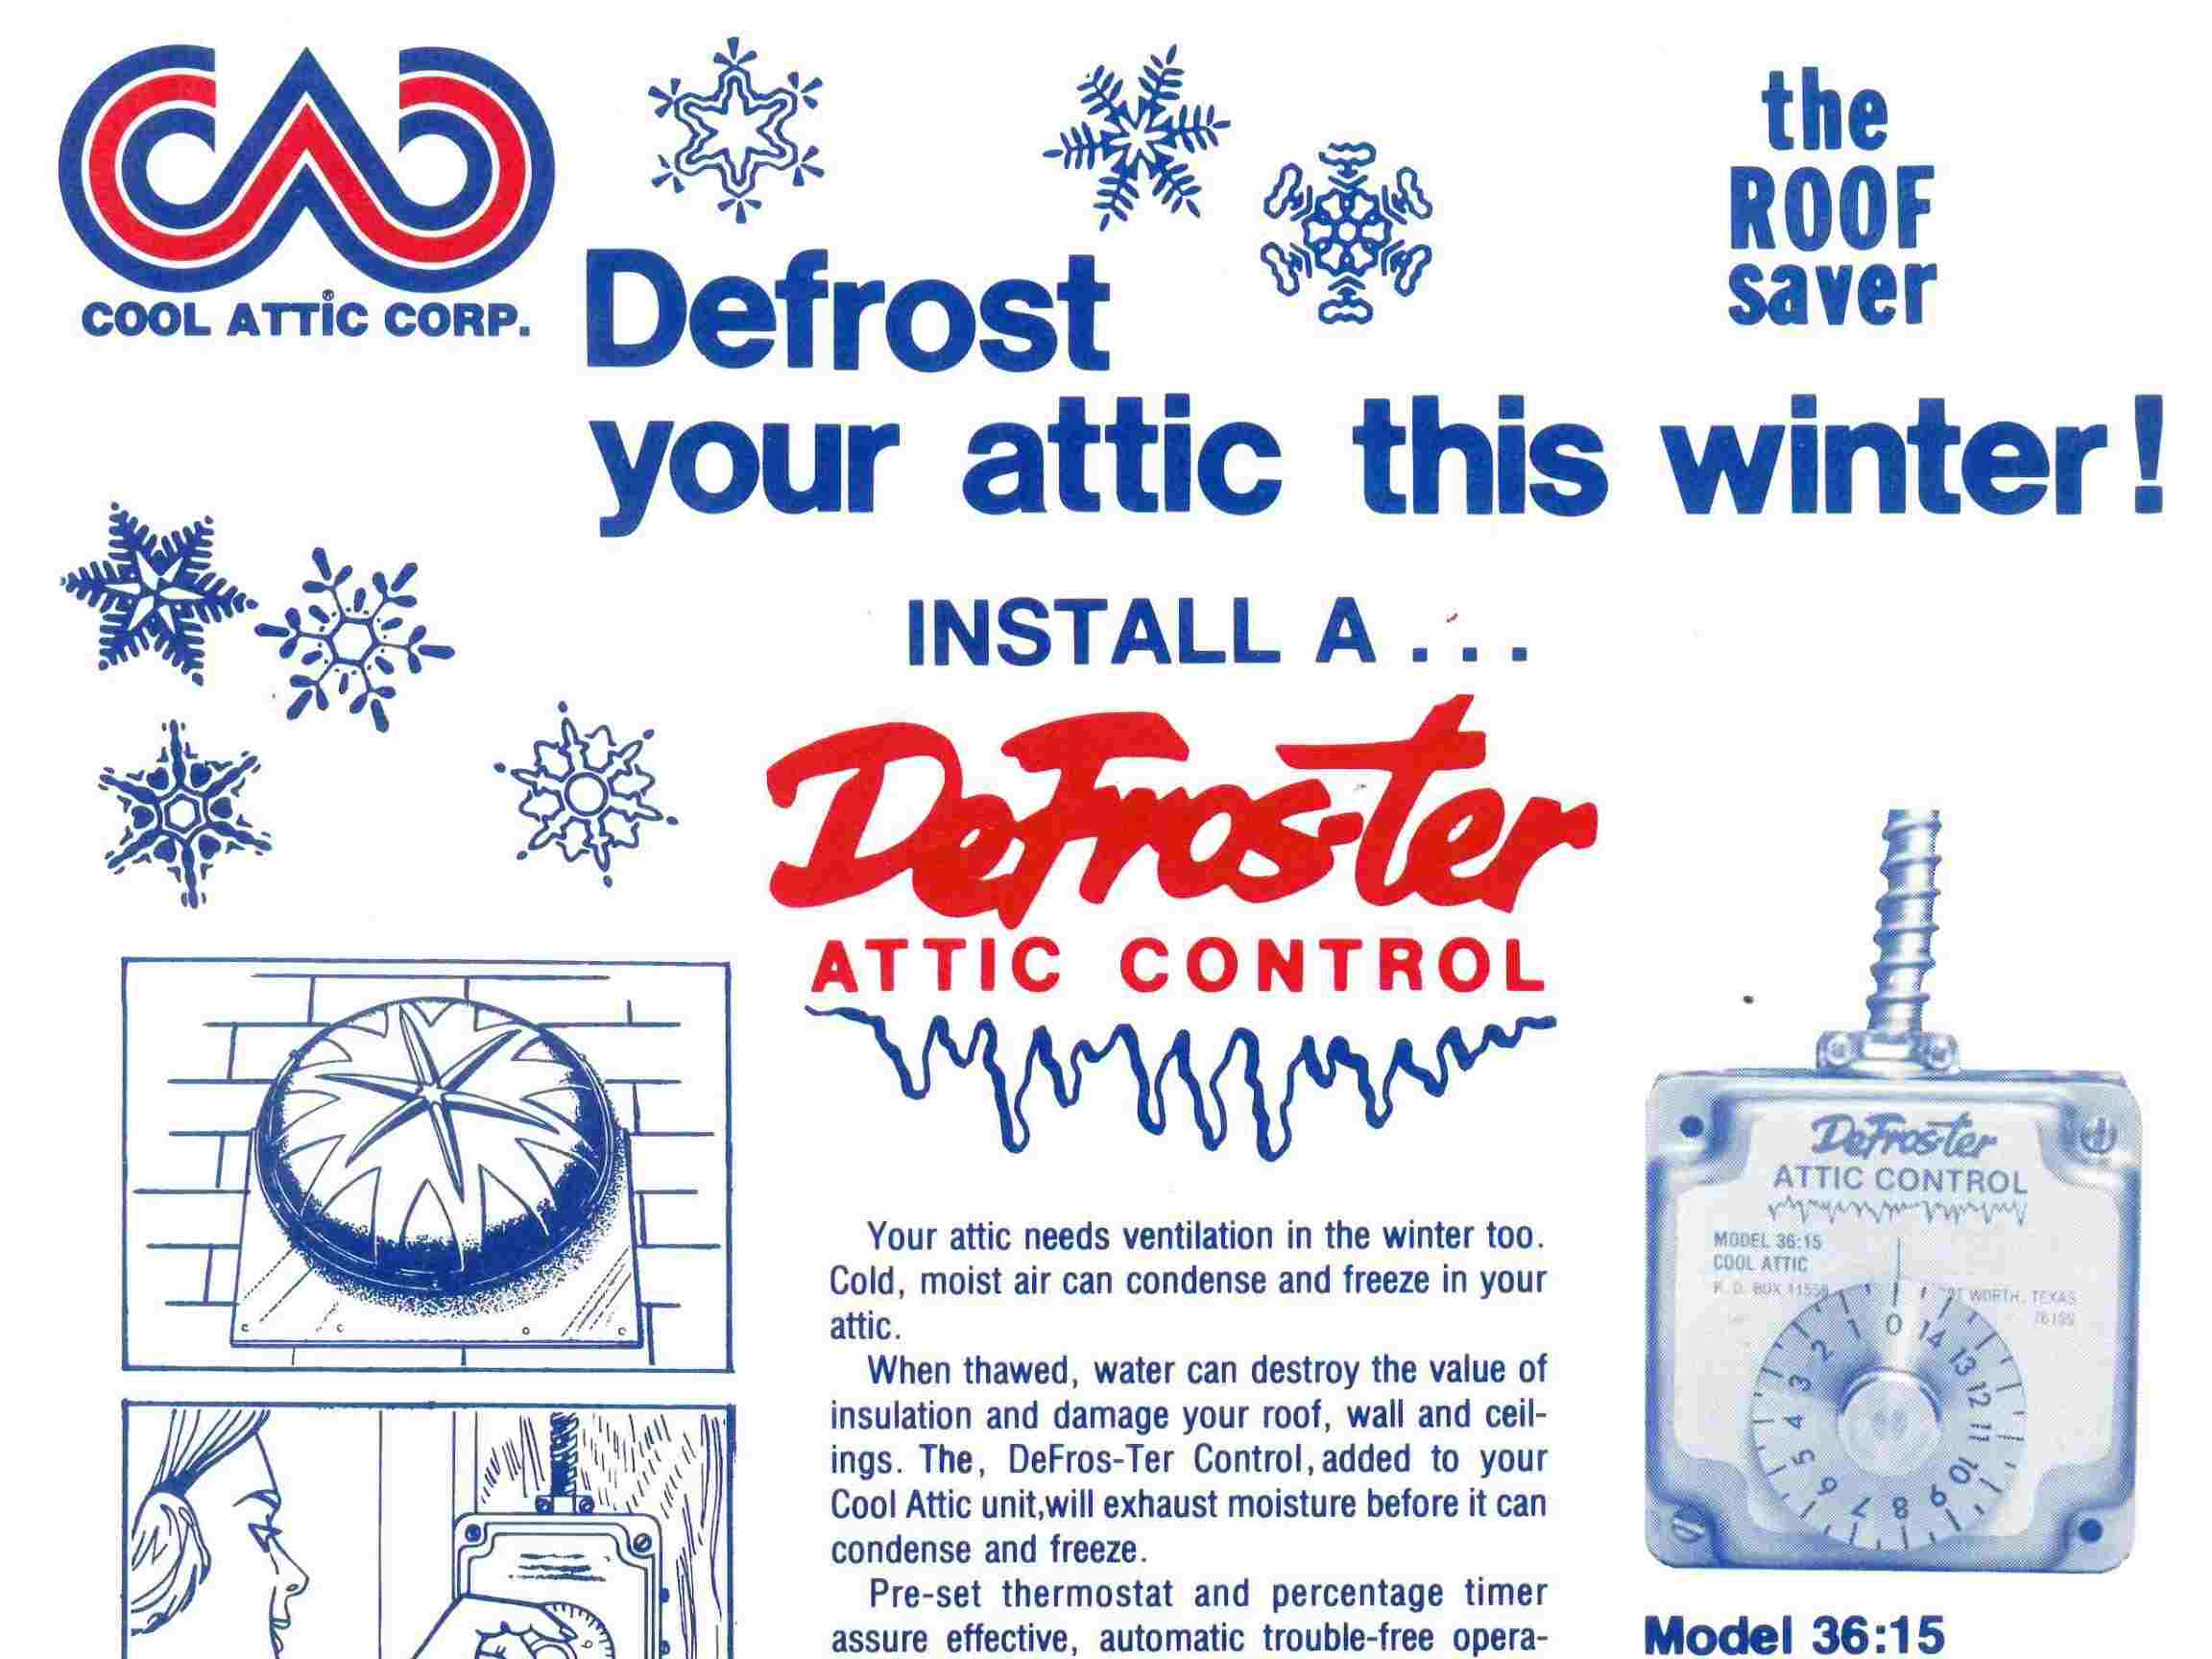 Old advertisement showing Ventamatic's former Attic DeFroster control under the Cool Attic brand name.